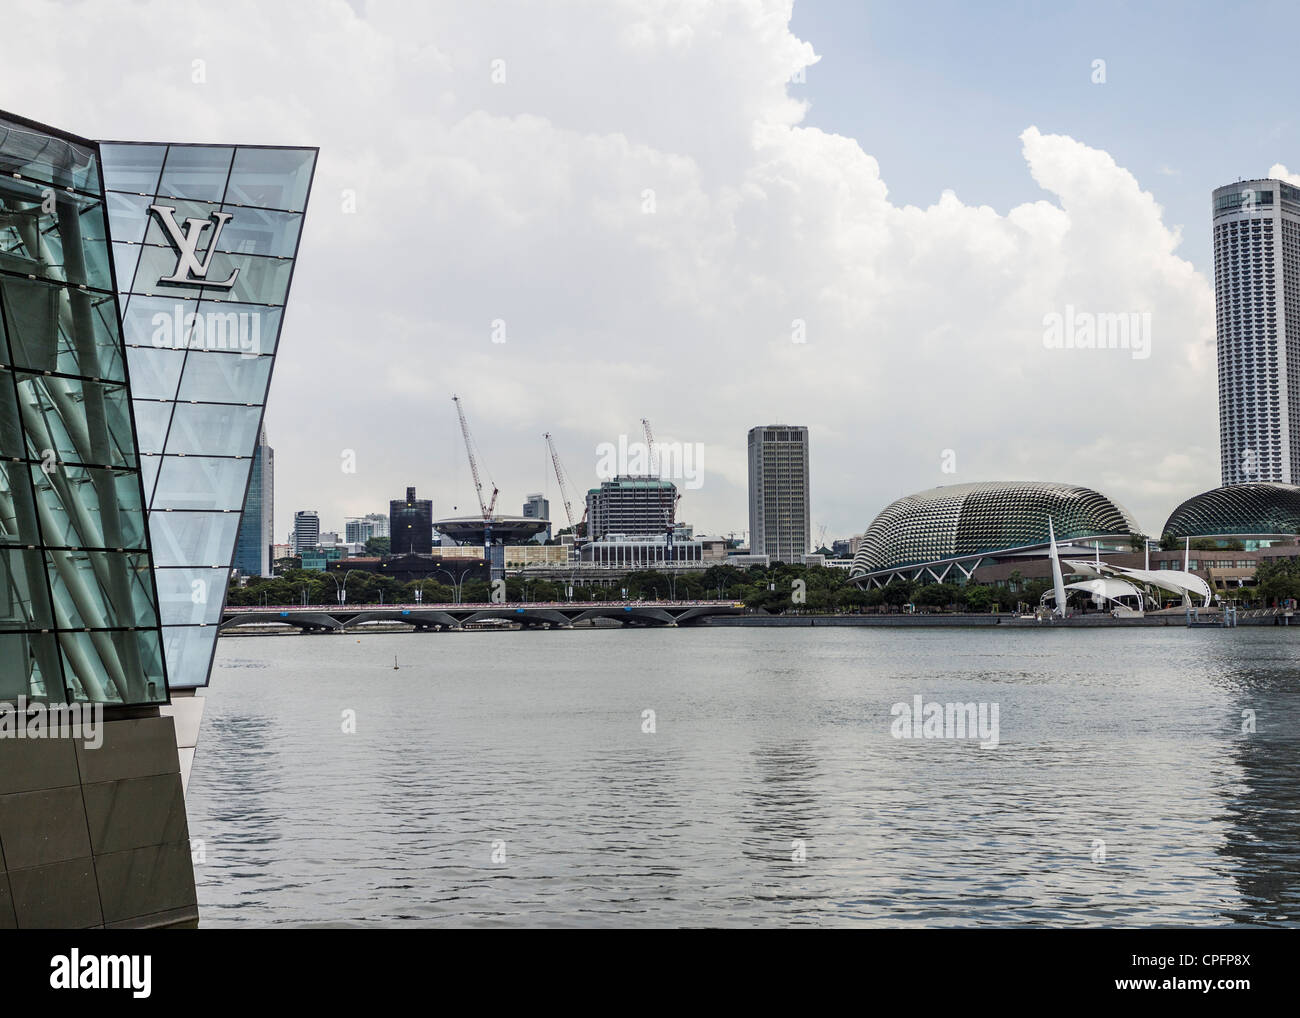 Louis Vuitton shop at Marina Bay Sands, Singapore. A modern shopping, hotel and casino complex. Stock Photo